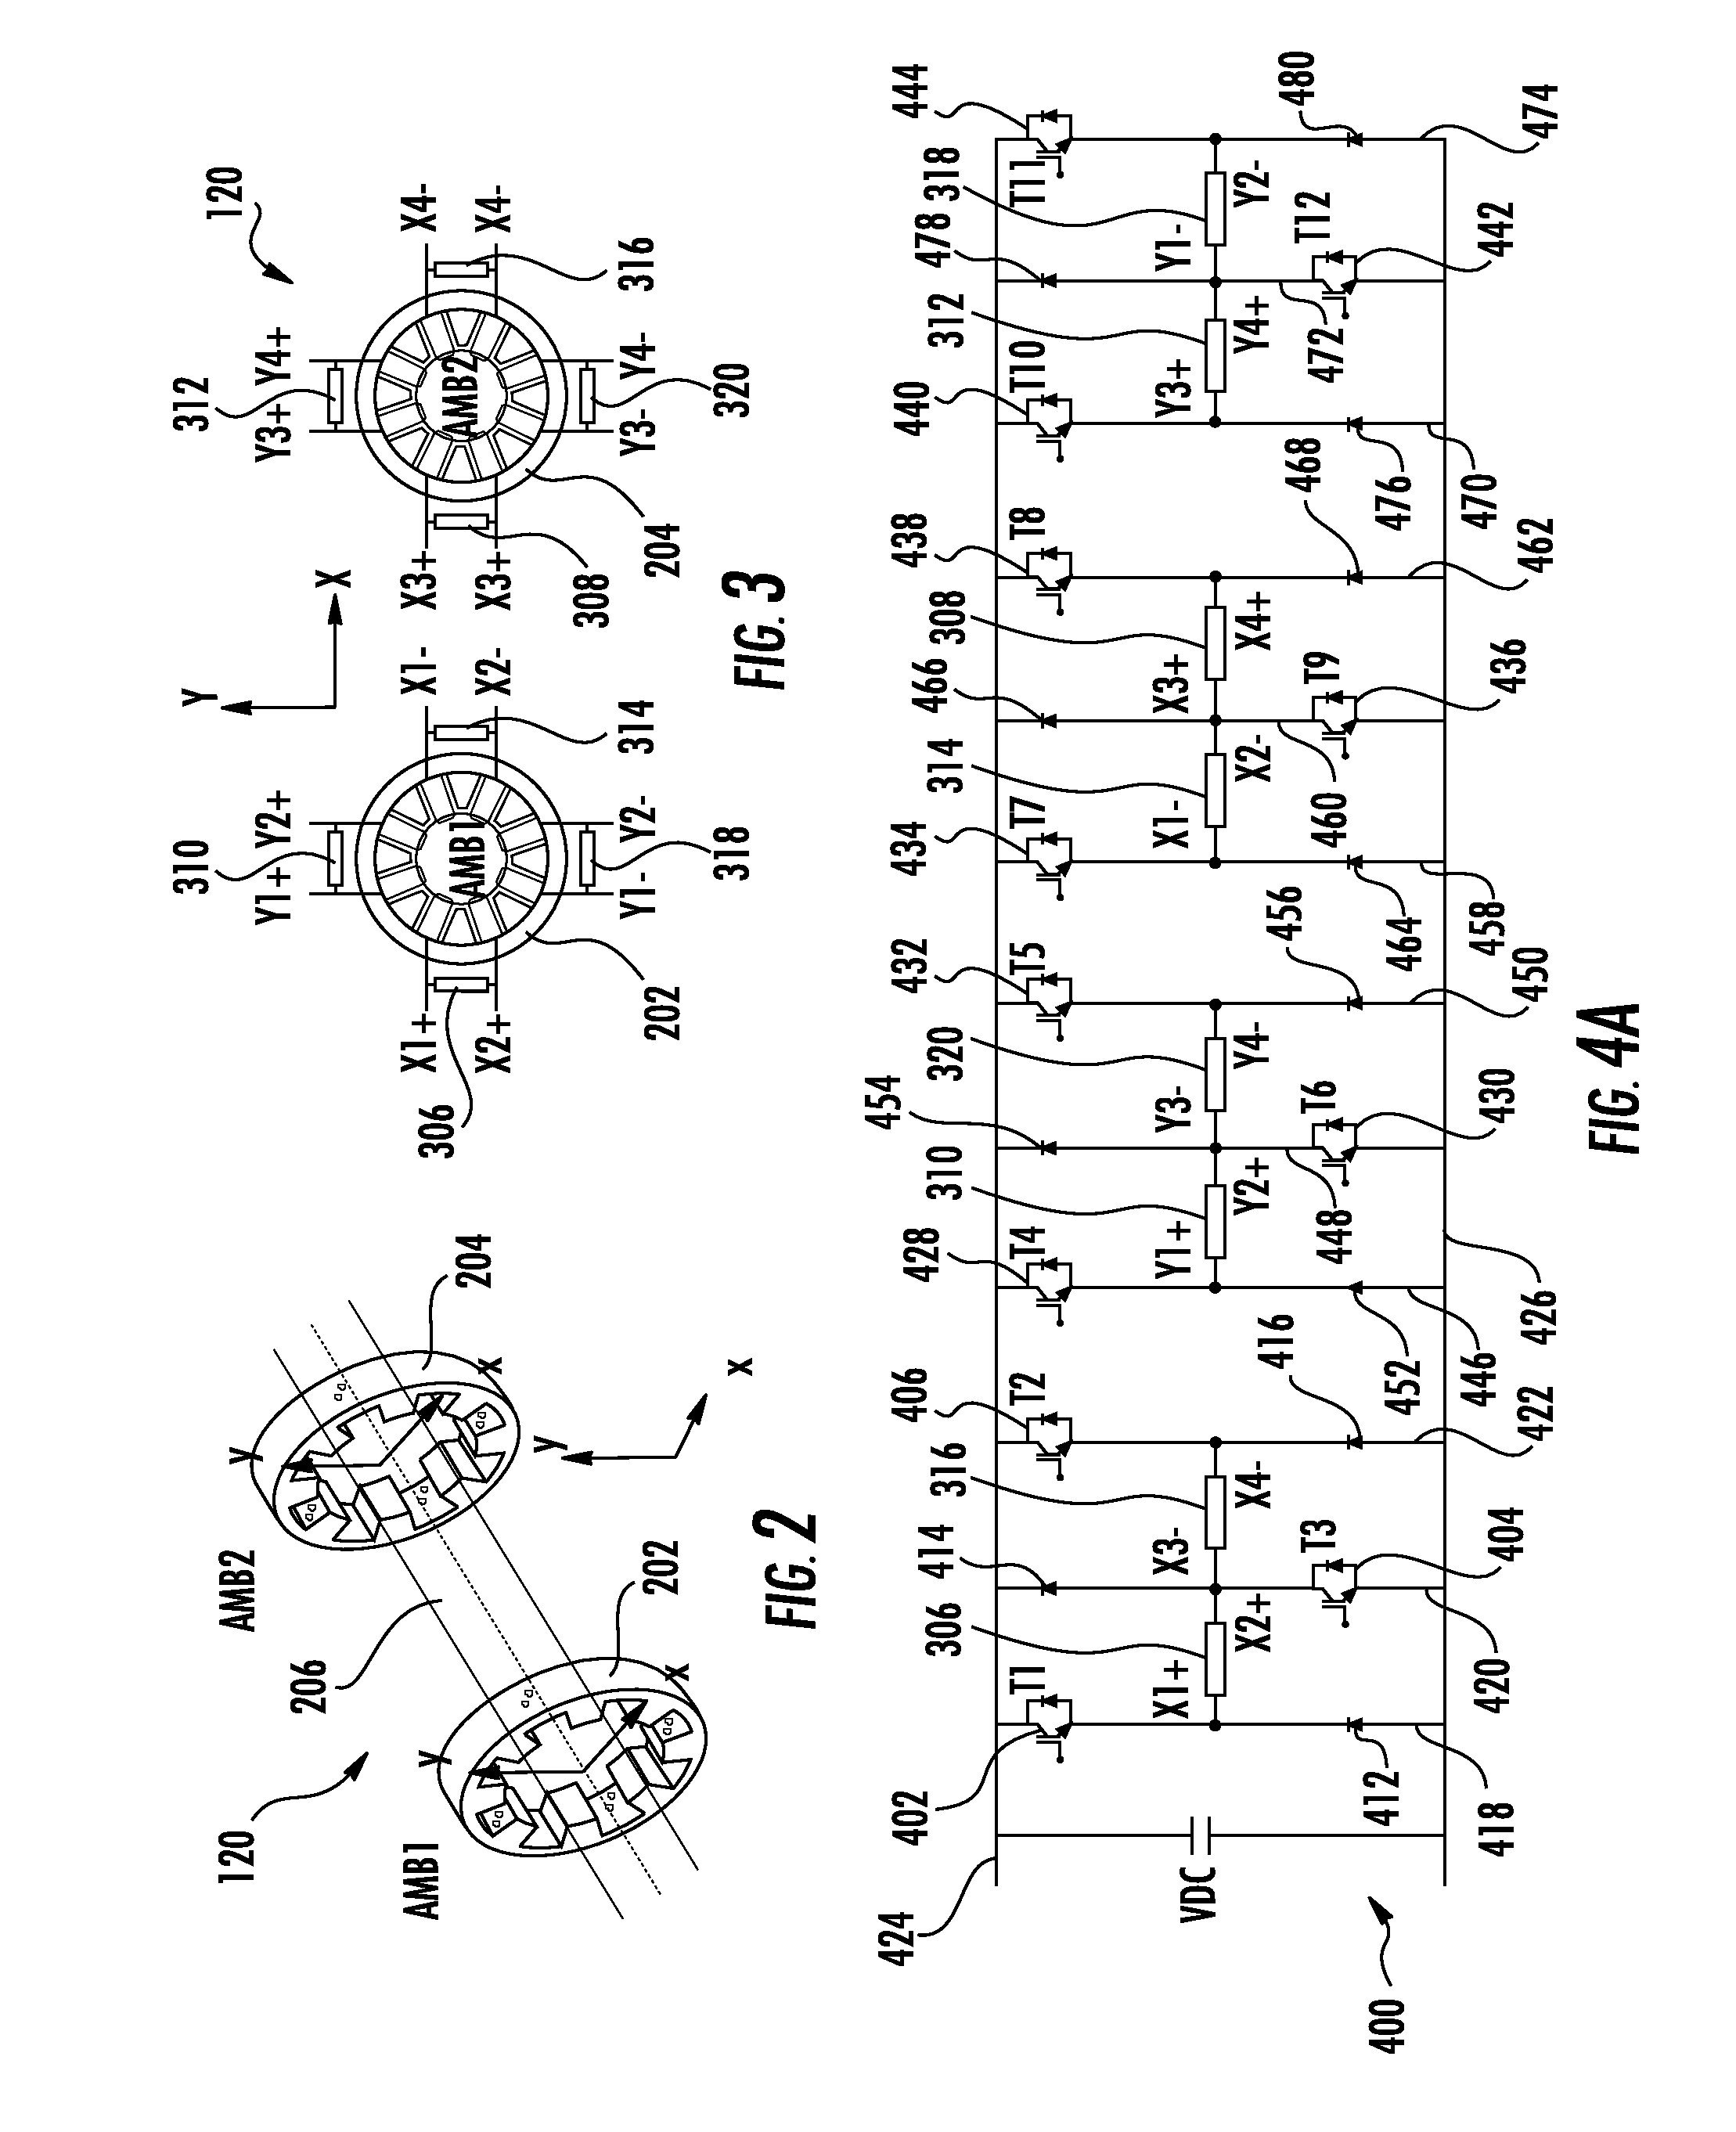 Multiple-axis magnetic bearing and control of the magnetic bearing with active switch topologies